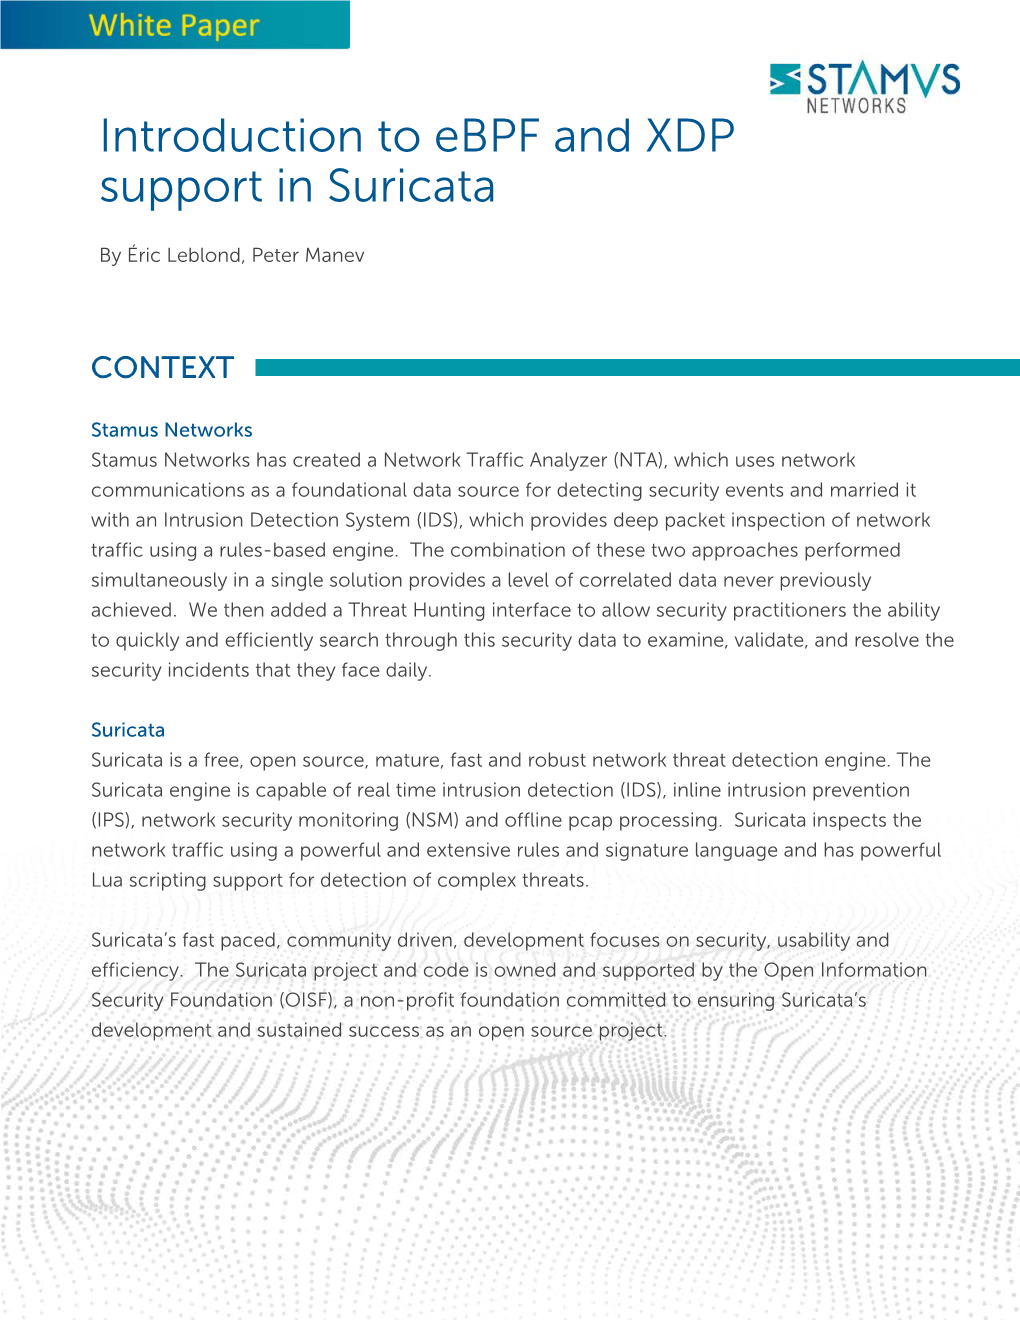 Introduction to Ebpf and XDP Support in Suricata